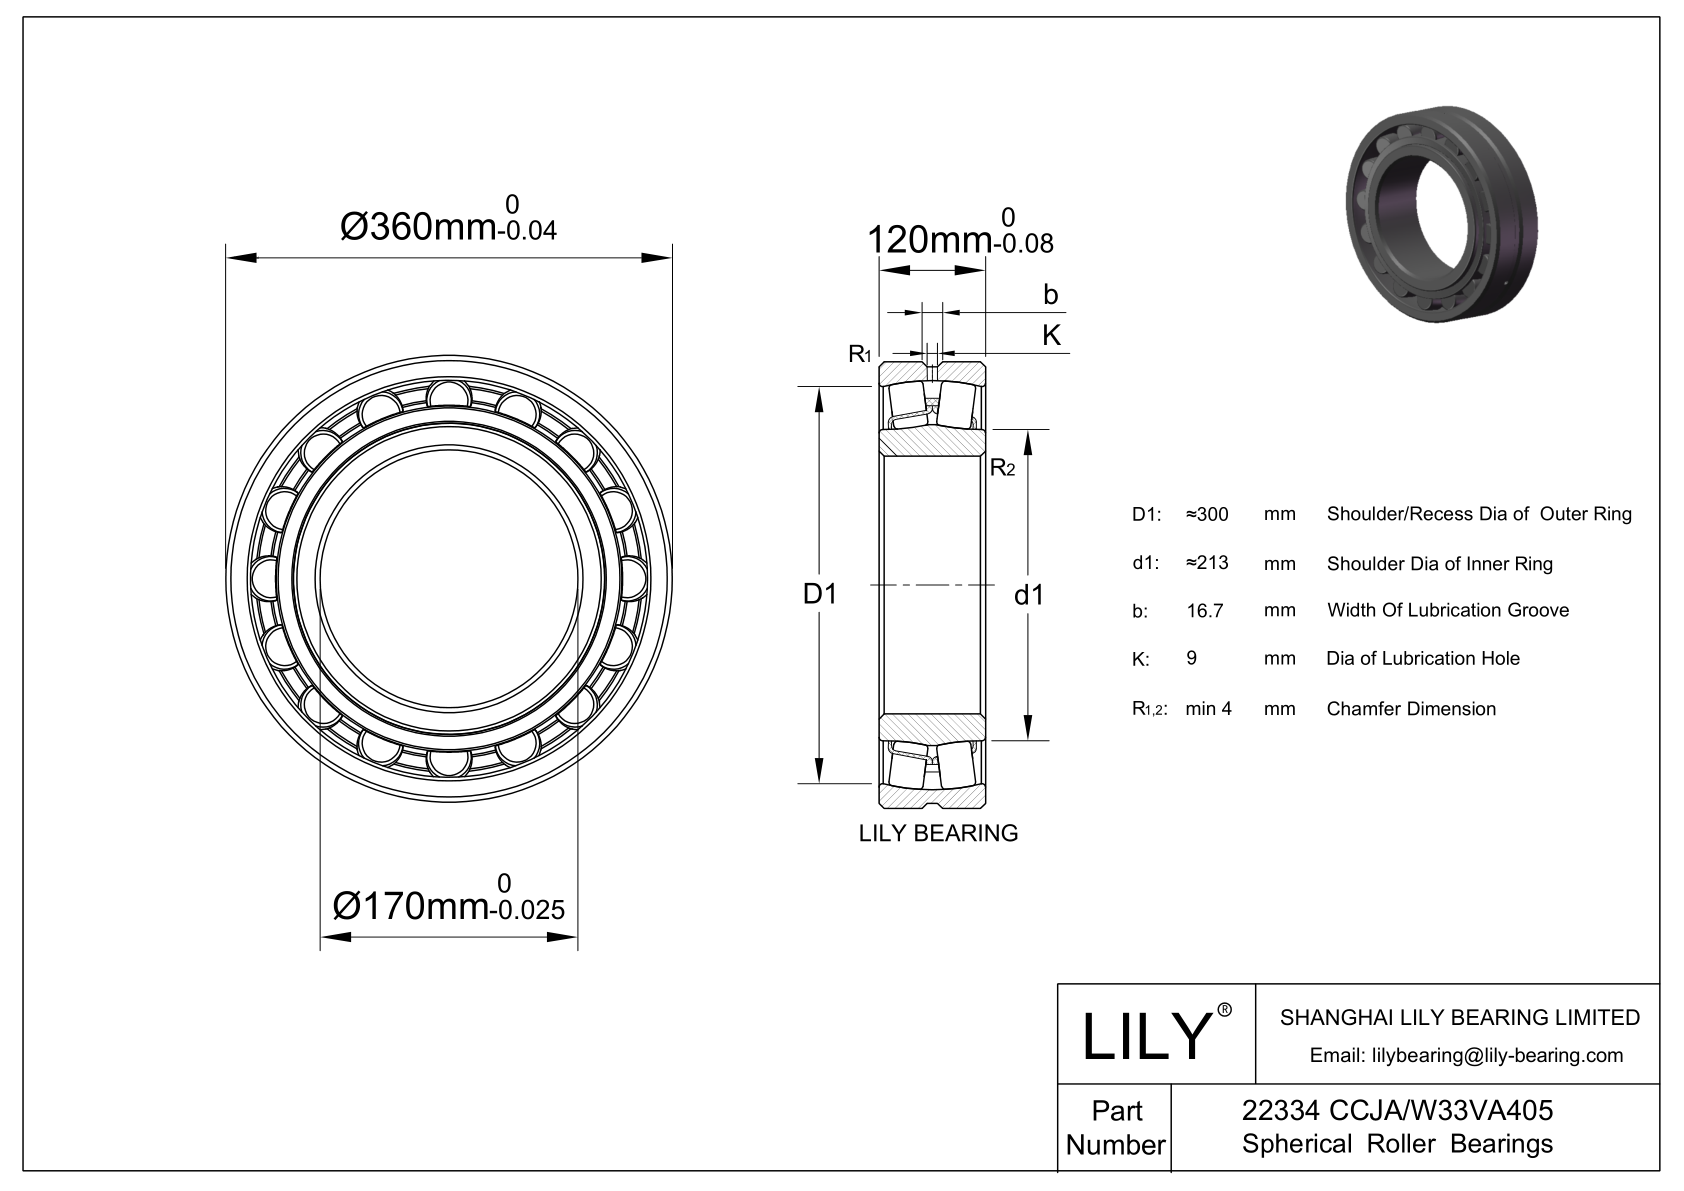 22334 CCJA/W33VA405 Double Row Spherical Roller Bearing cad drawing